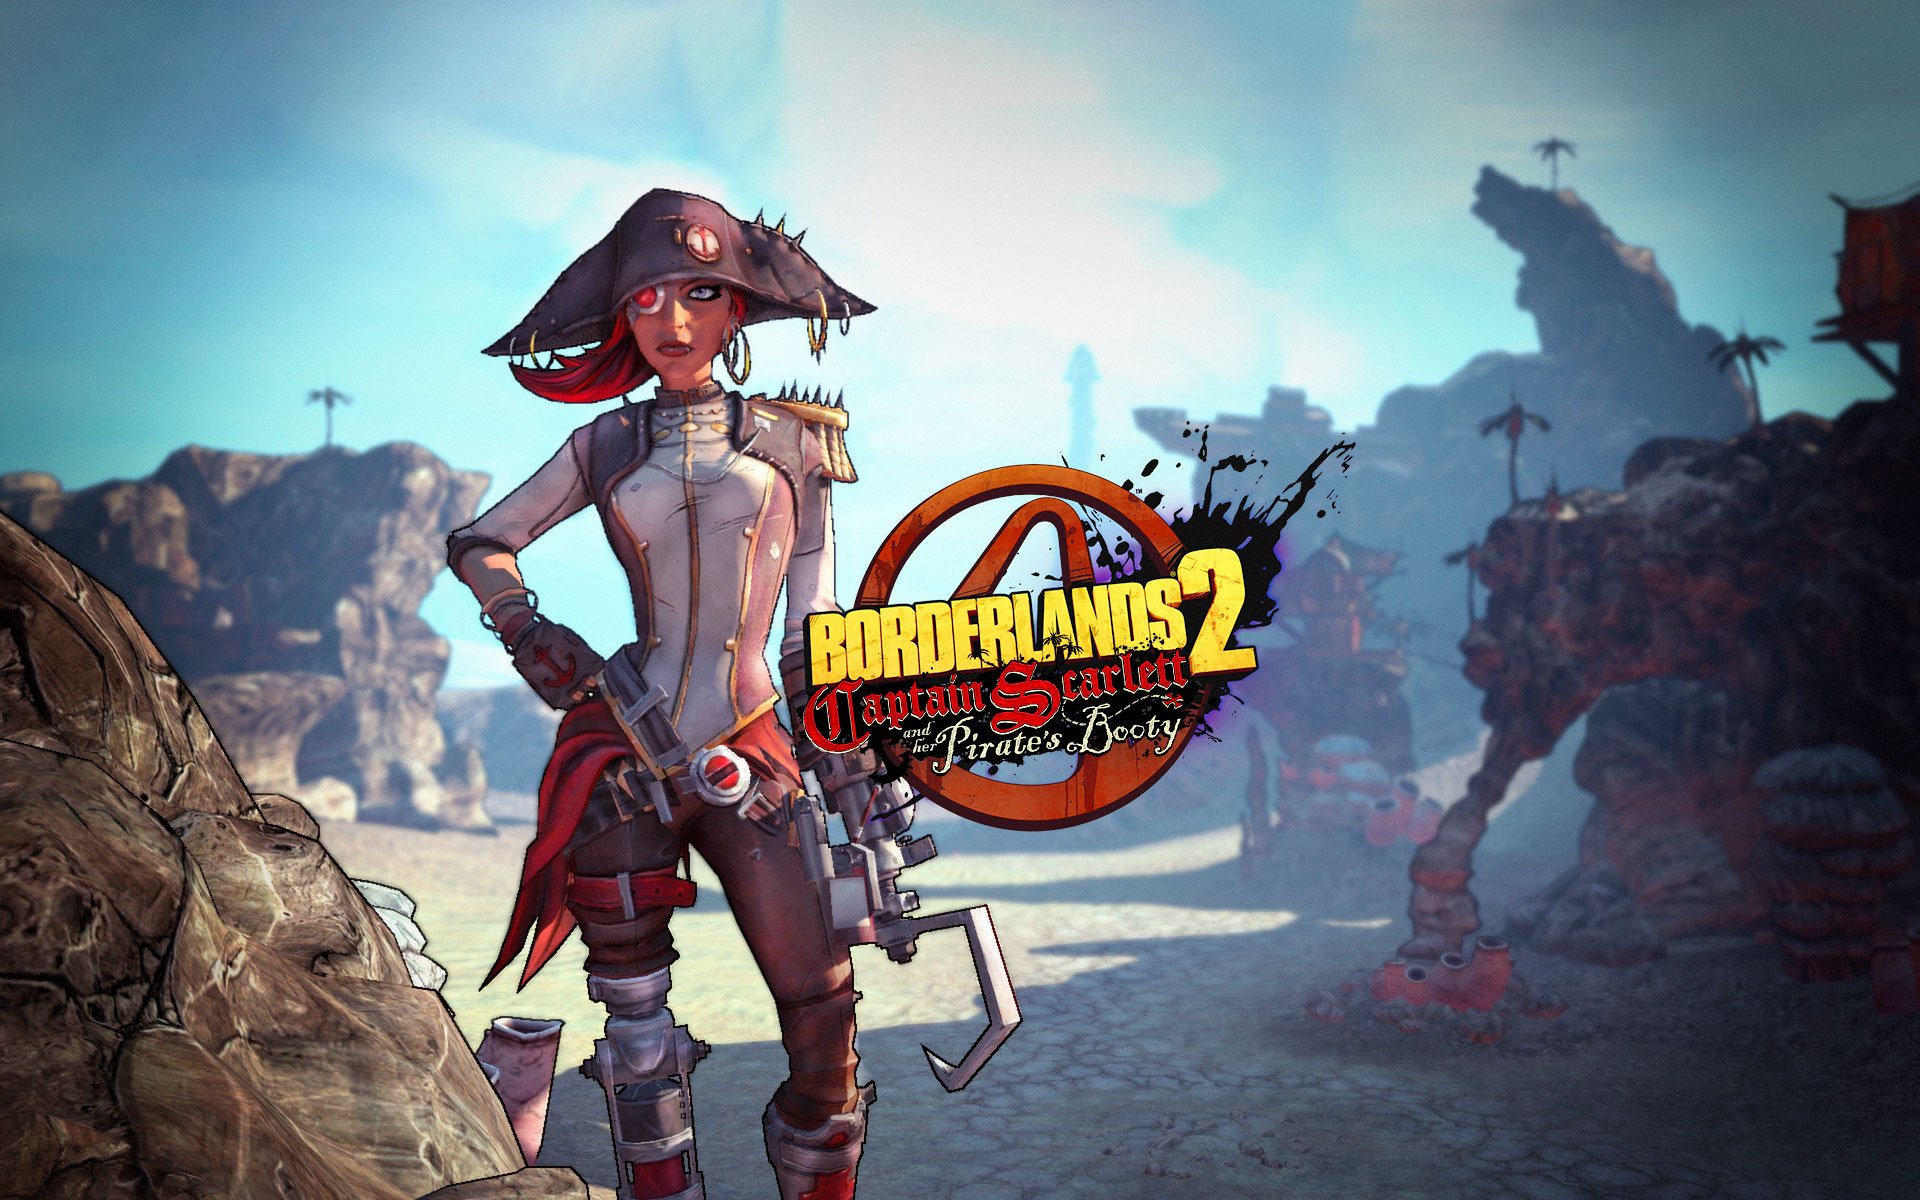 Borderlands 2 - Captain Scarlett and her Pirate's Booty (DLC) .